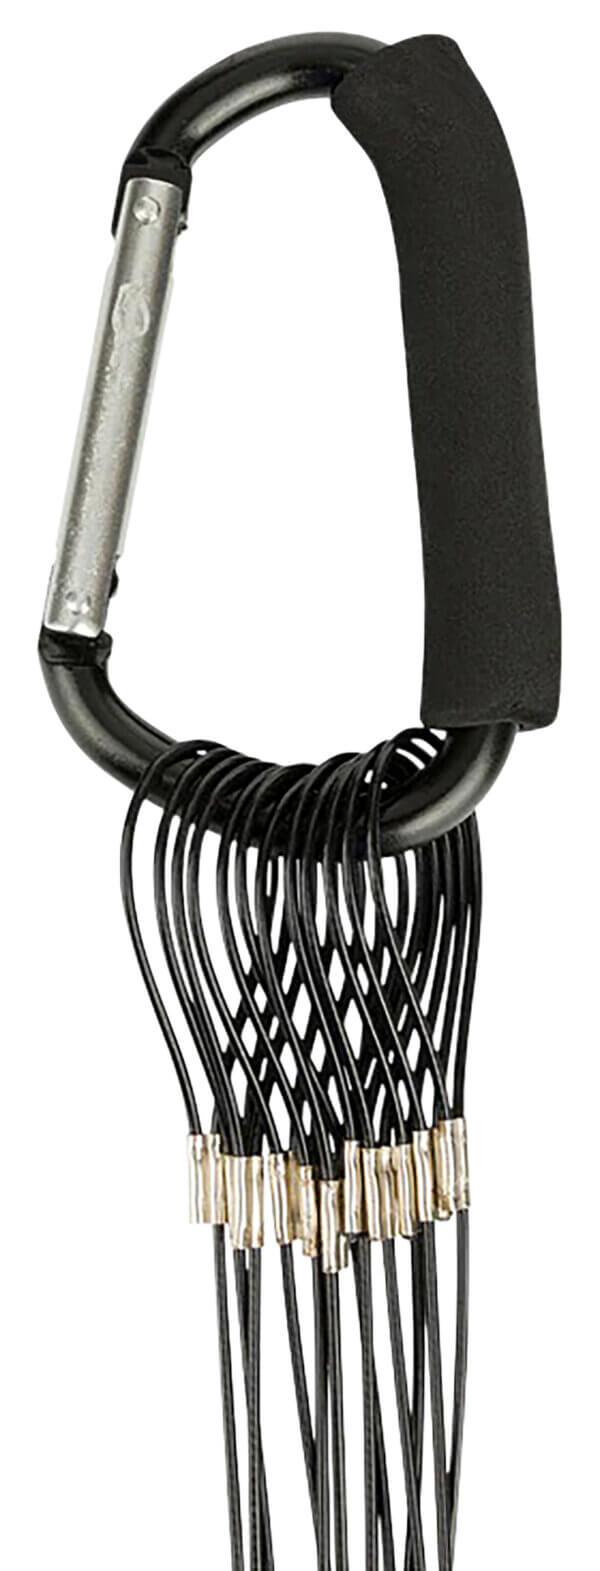 Drake Waterfowl DA9000060006 Texas Rig Package Set 60″ Black Coated Steel Wire 6 oz Lead Weight Metal Cable Crimps Includes Carabiner (12 Pack)